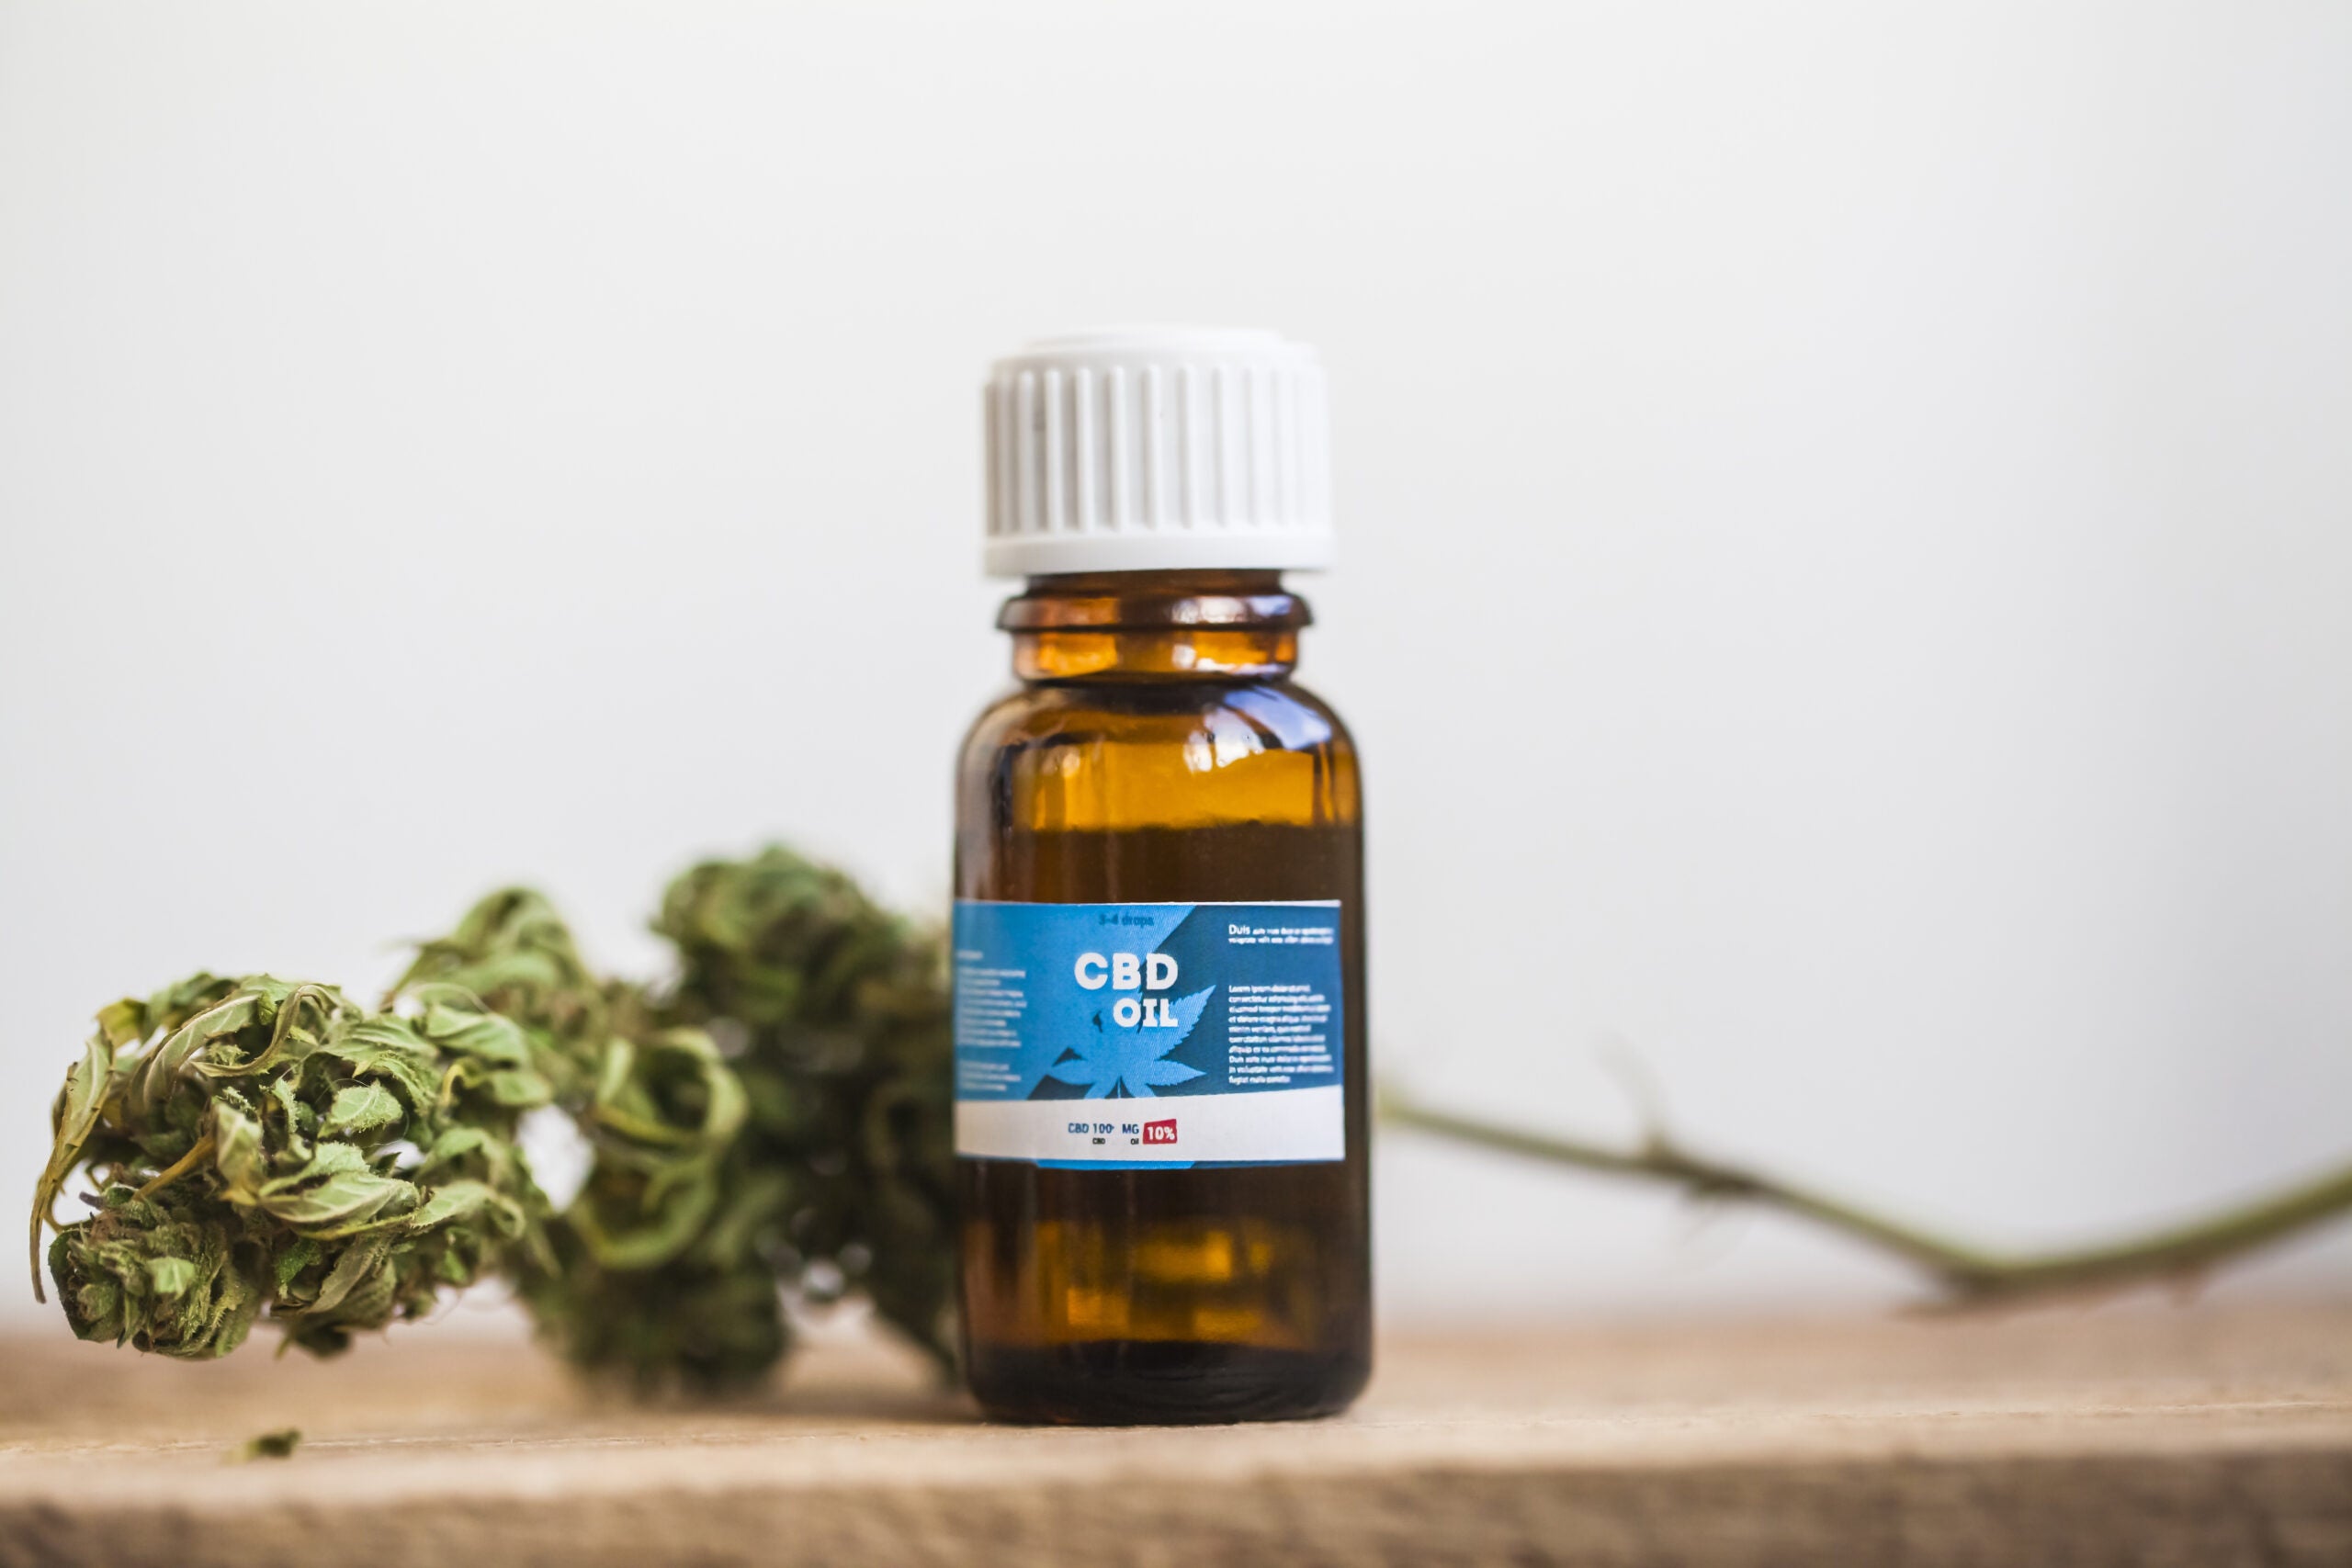 Will Federal Regulation Of CBD Open The Doors For Other Cannabinoids?